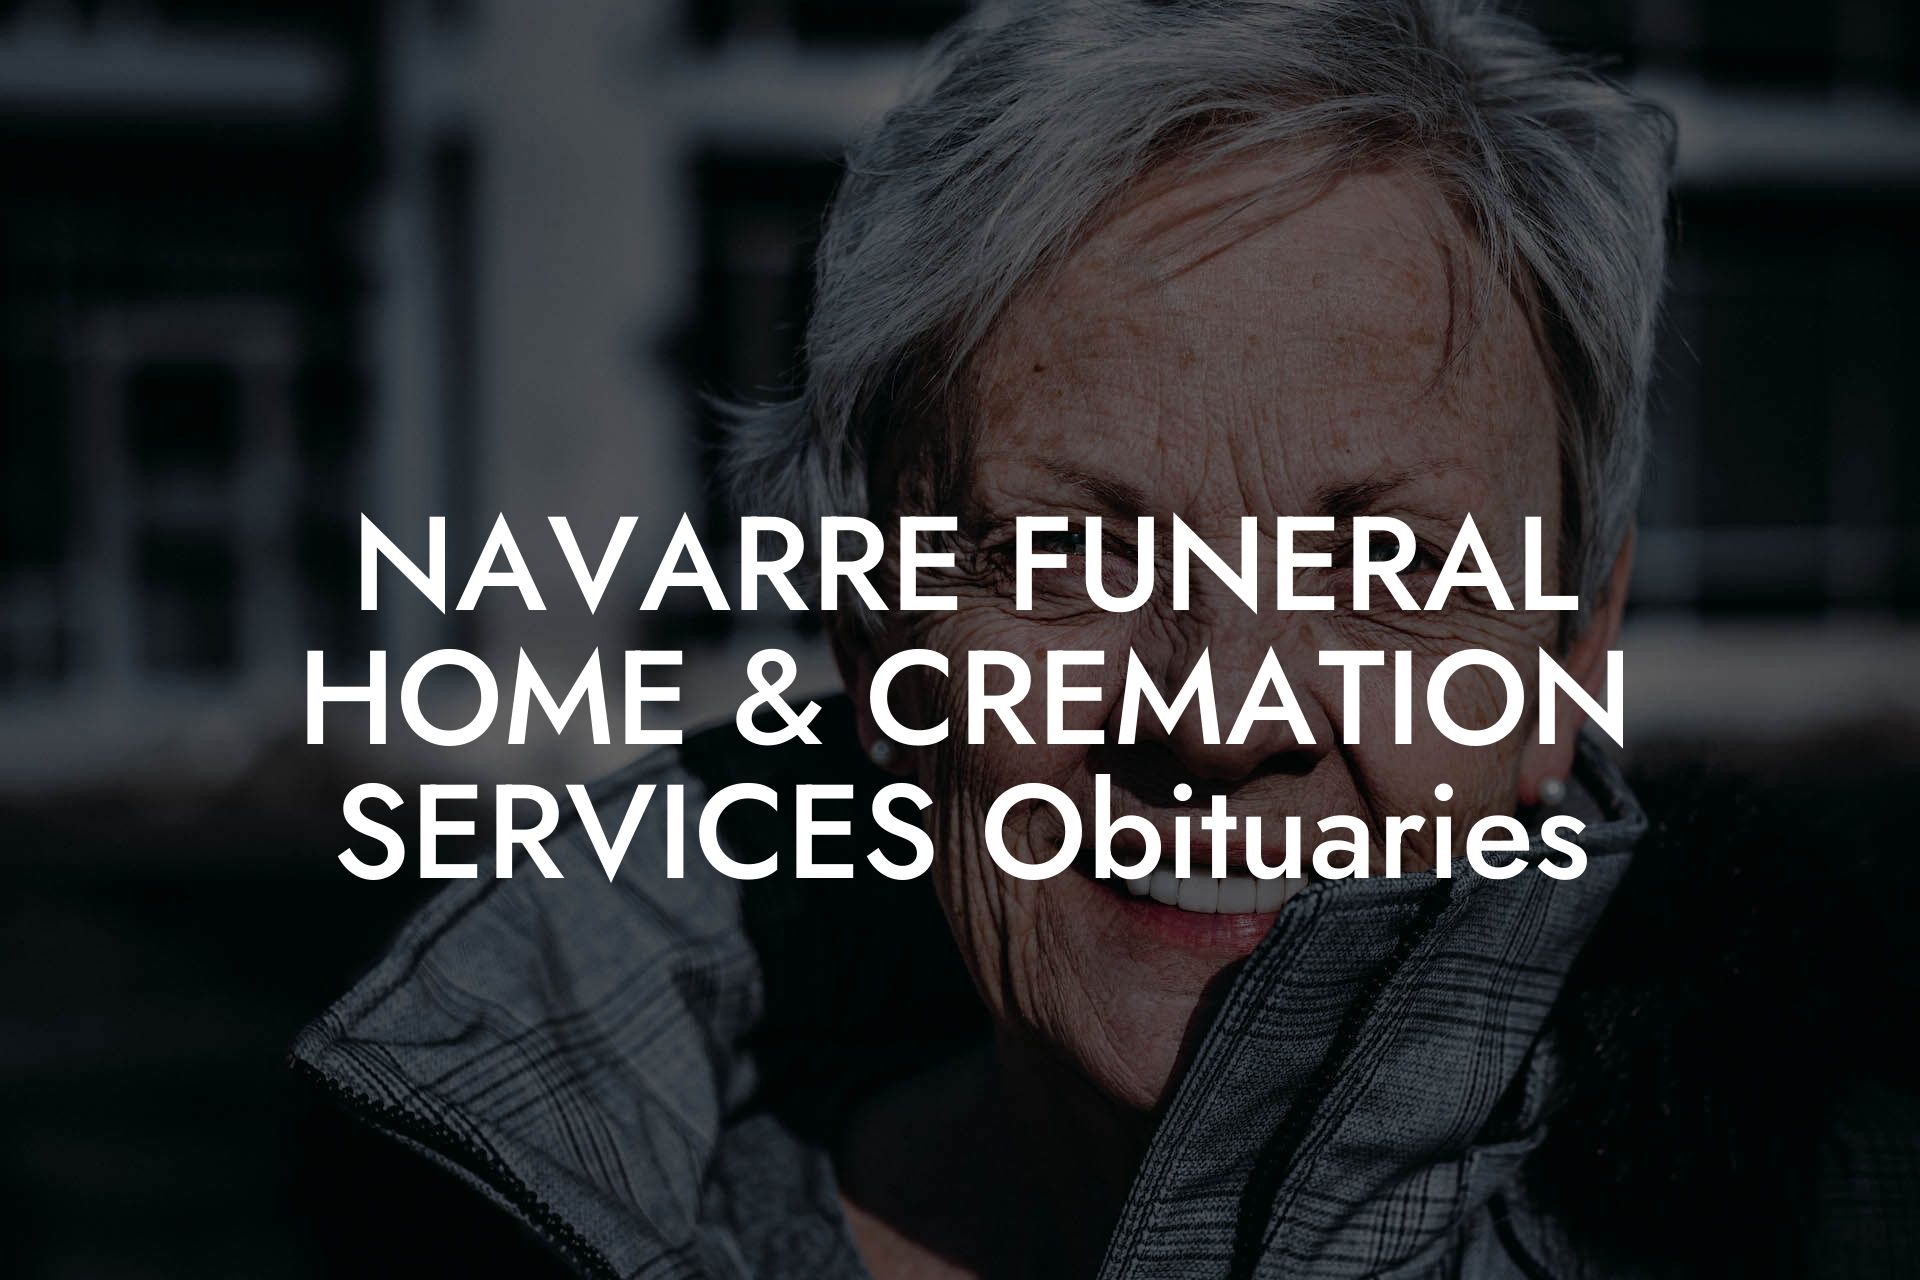 NAVARRE FUNERAL HOME & CREMATION SERVICES Obituaries